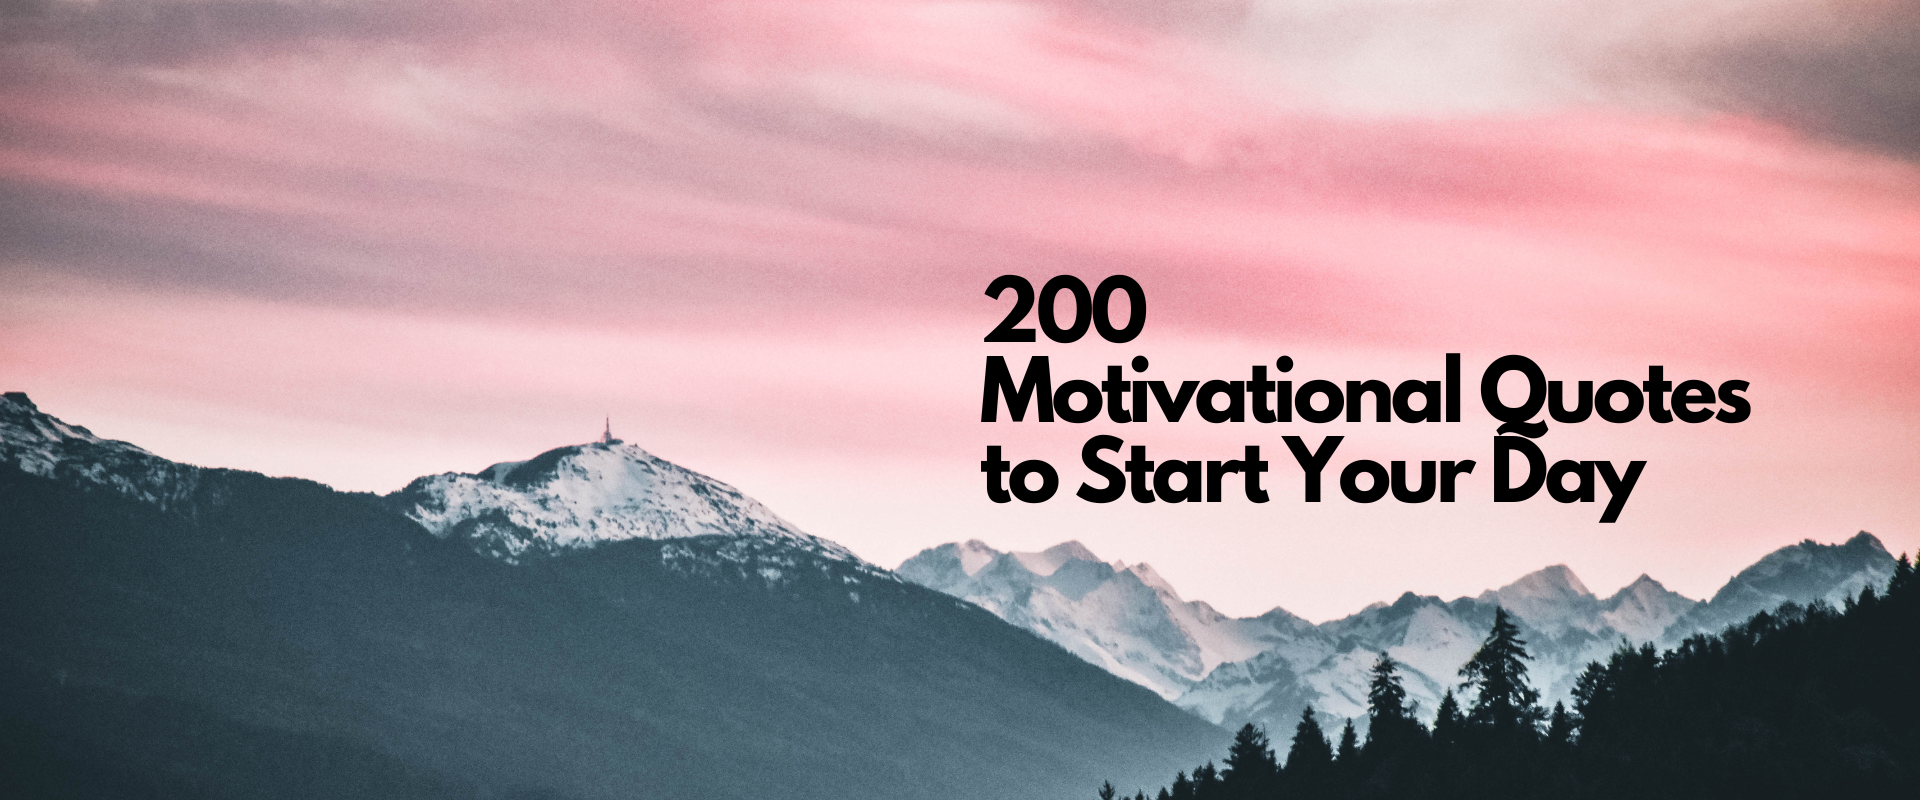 Motivational Quotes: 200 Inspiring quotes to start your day